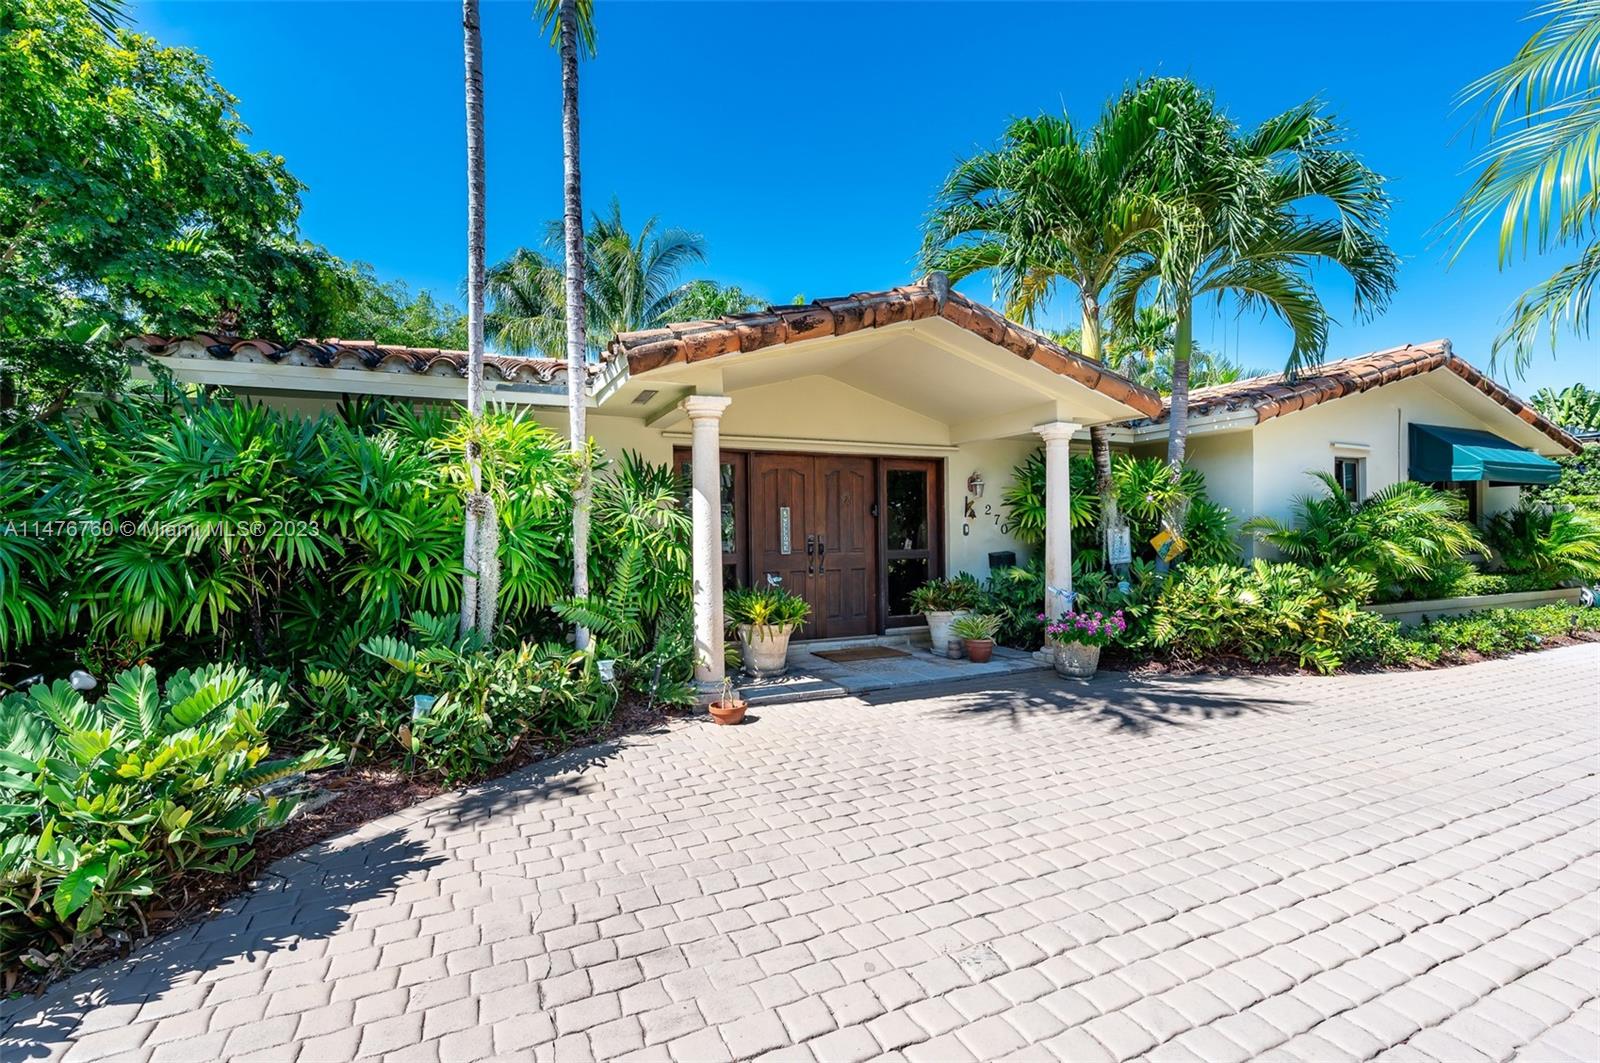 Have it all! Update this spacious and charming split floorplan home that boasts 6 bedrooms, 4 bathrooms, guest bathroom, pool and summer kitchen or build your dream 4,000 SqFt home on an oversized 8,474 SF lot - this is a fantastic investment opportunity. Located on quiet Cypress Drive - one of the best streets on Key Biscayne due to its natural, 10 foot elevation and walkability to the Key Biscayne Yacht Club, shopping, restaurants, churches, schools, Village Green and more, this is a true gem!